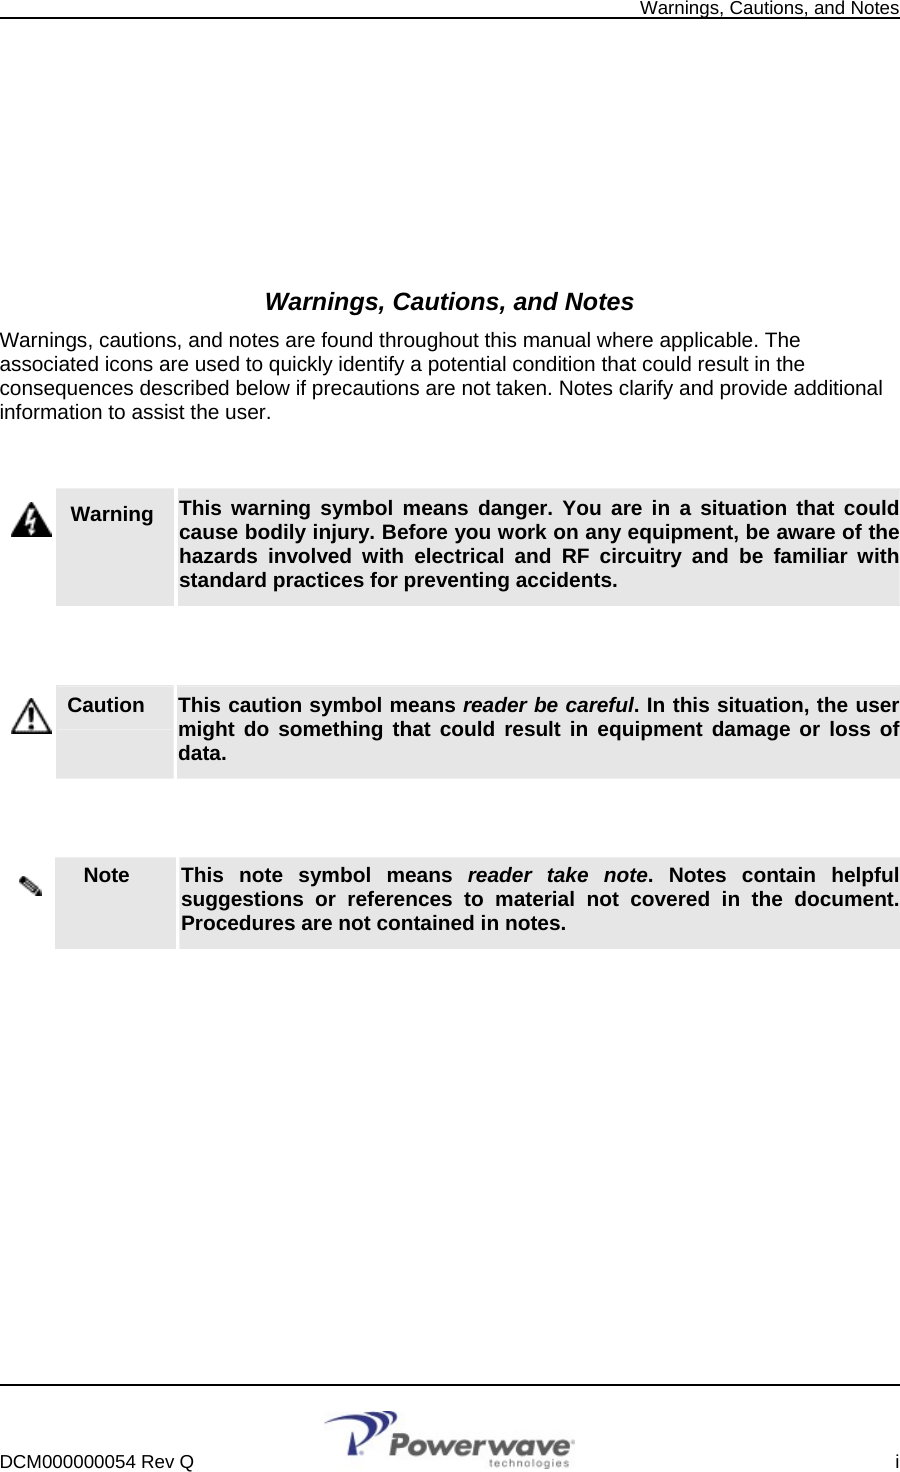   Warnings, Cautions, and Notes          Warnings, Cautions, and Notes Warnings, cautions, and notes are found throughout this manual where applicable. The associated icons are used to quickly identify a potential condition that could result in the consequences described below if precautions are not taken. Notes clarify and provide additional information to assist the user.   Warning   This warning symbol means danger. You are in a situation that could cause bodily injury. Before you work on any equipment, be aware of the hazards involved with electrical and RF circuitry and be familiar with standard practices for preventing accidents.   Caution     This caution symbol means reader be careful. In this situation, the user might do something that could result in equipment damage or loss of data.   Note     This note symbol means reader take note. Notes contain helpful suggestions or references to material not covered in the document. Procedures are not contained in notes.          DCM000000054 Rev Q    i  